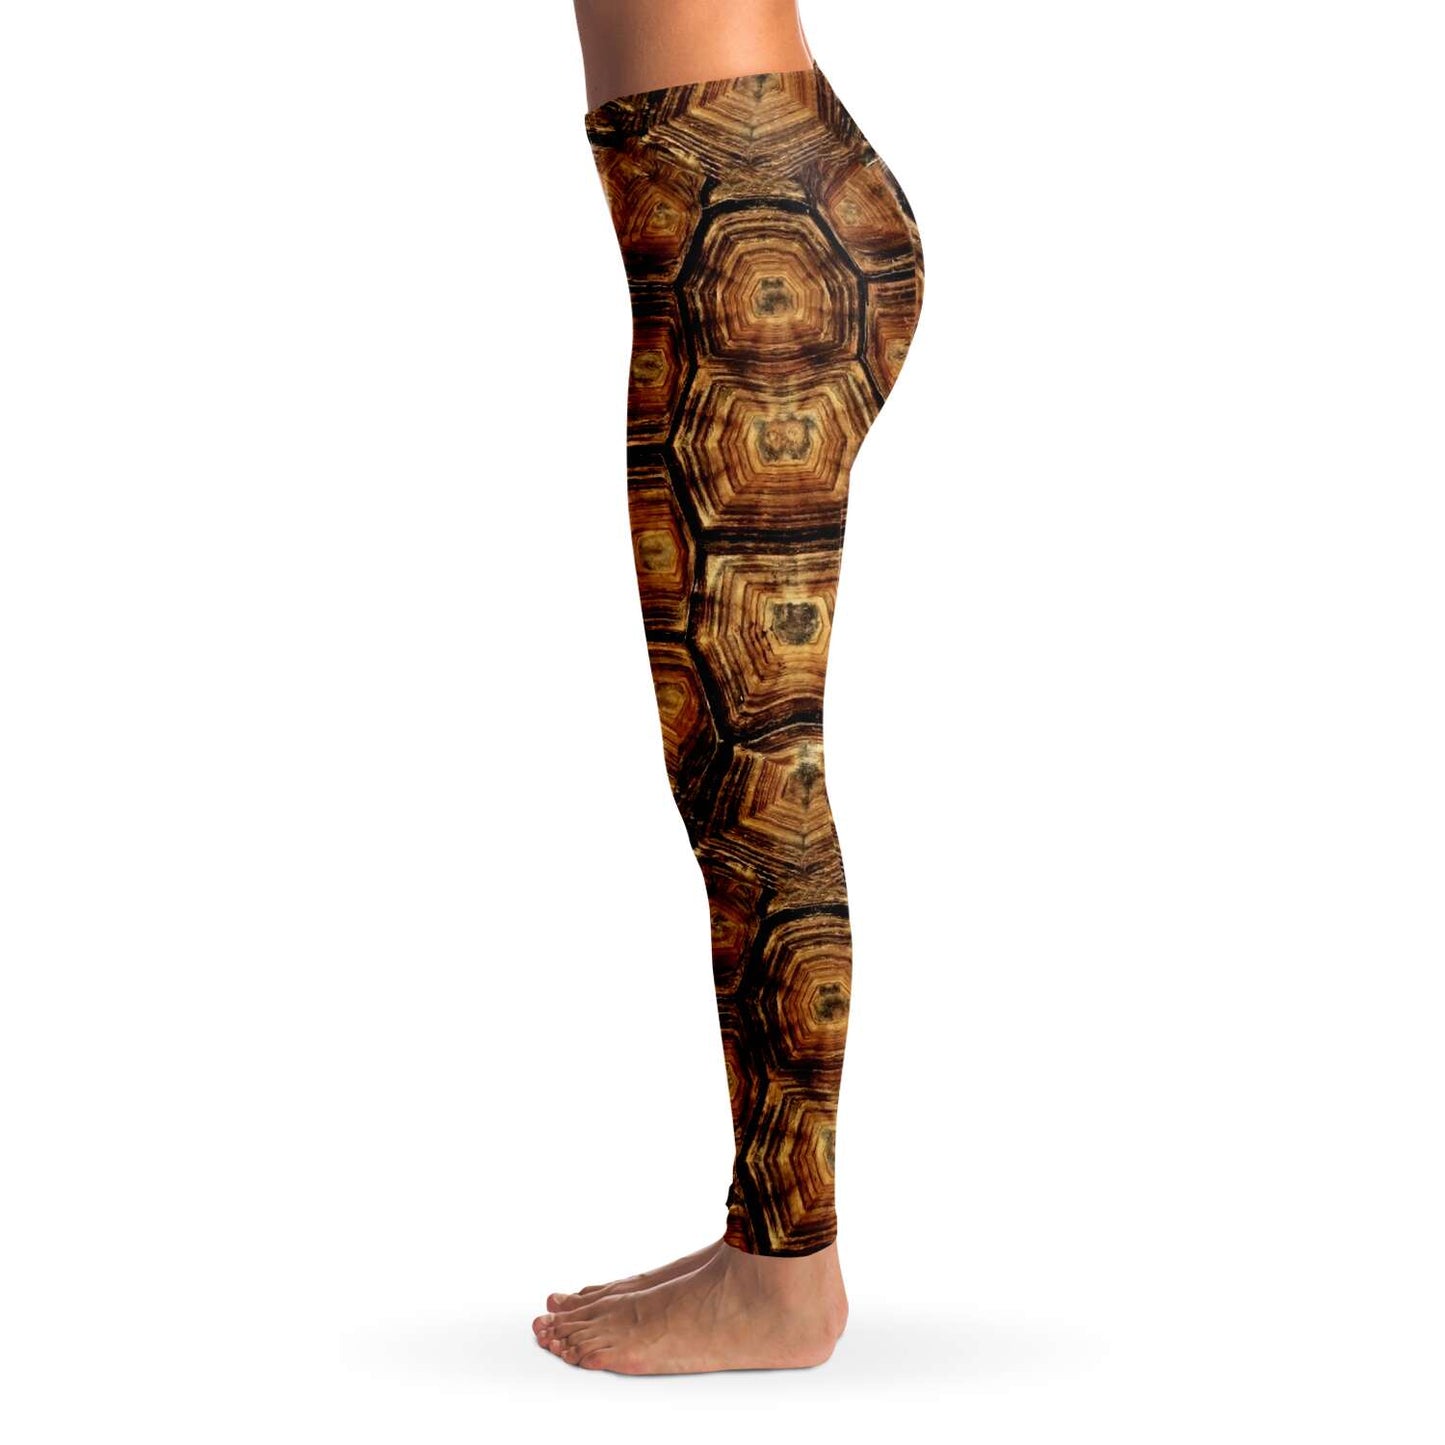 Side view on model of turtle leggings / skins for scuba diving, yoga and other sports